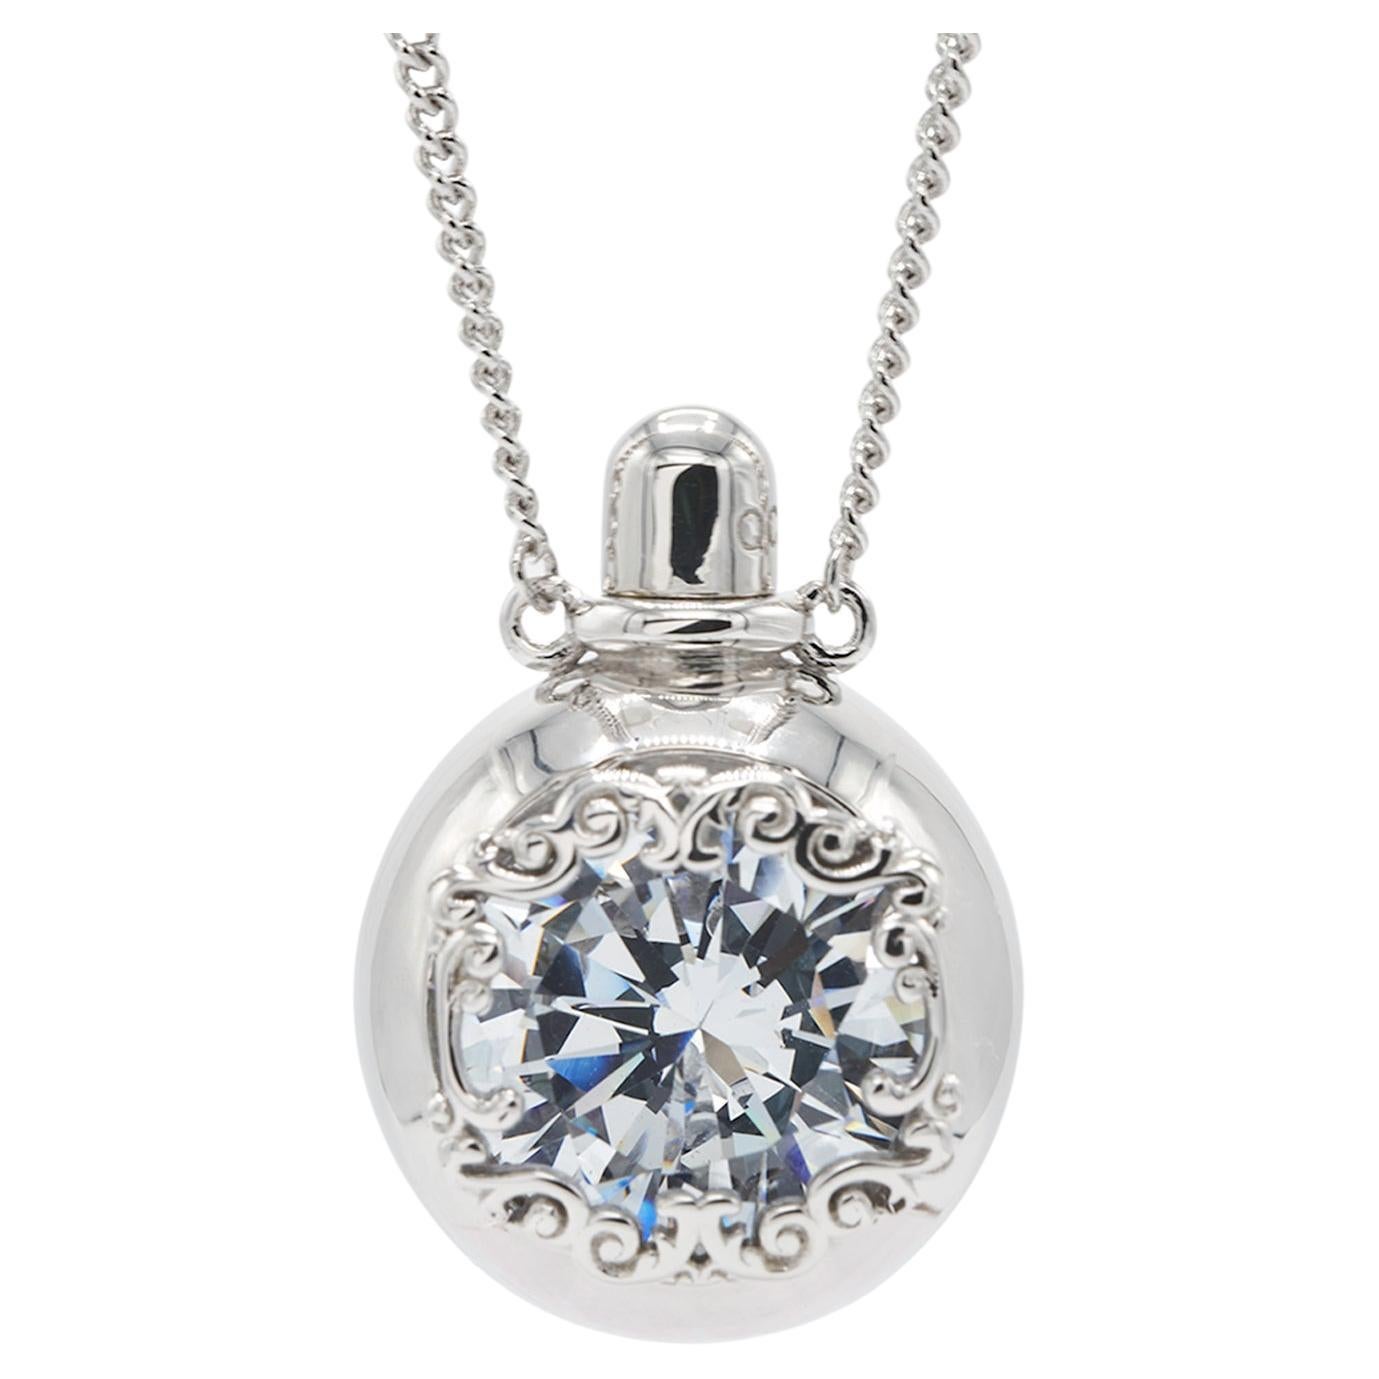 Round Silver Scent Bottle Necklace